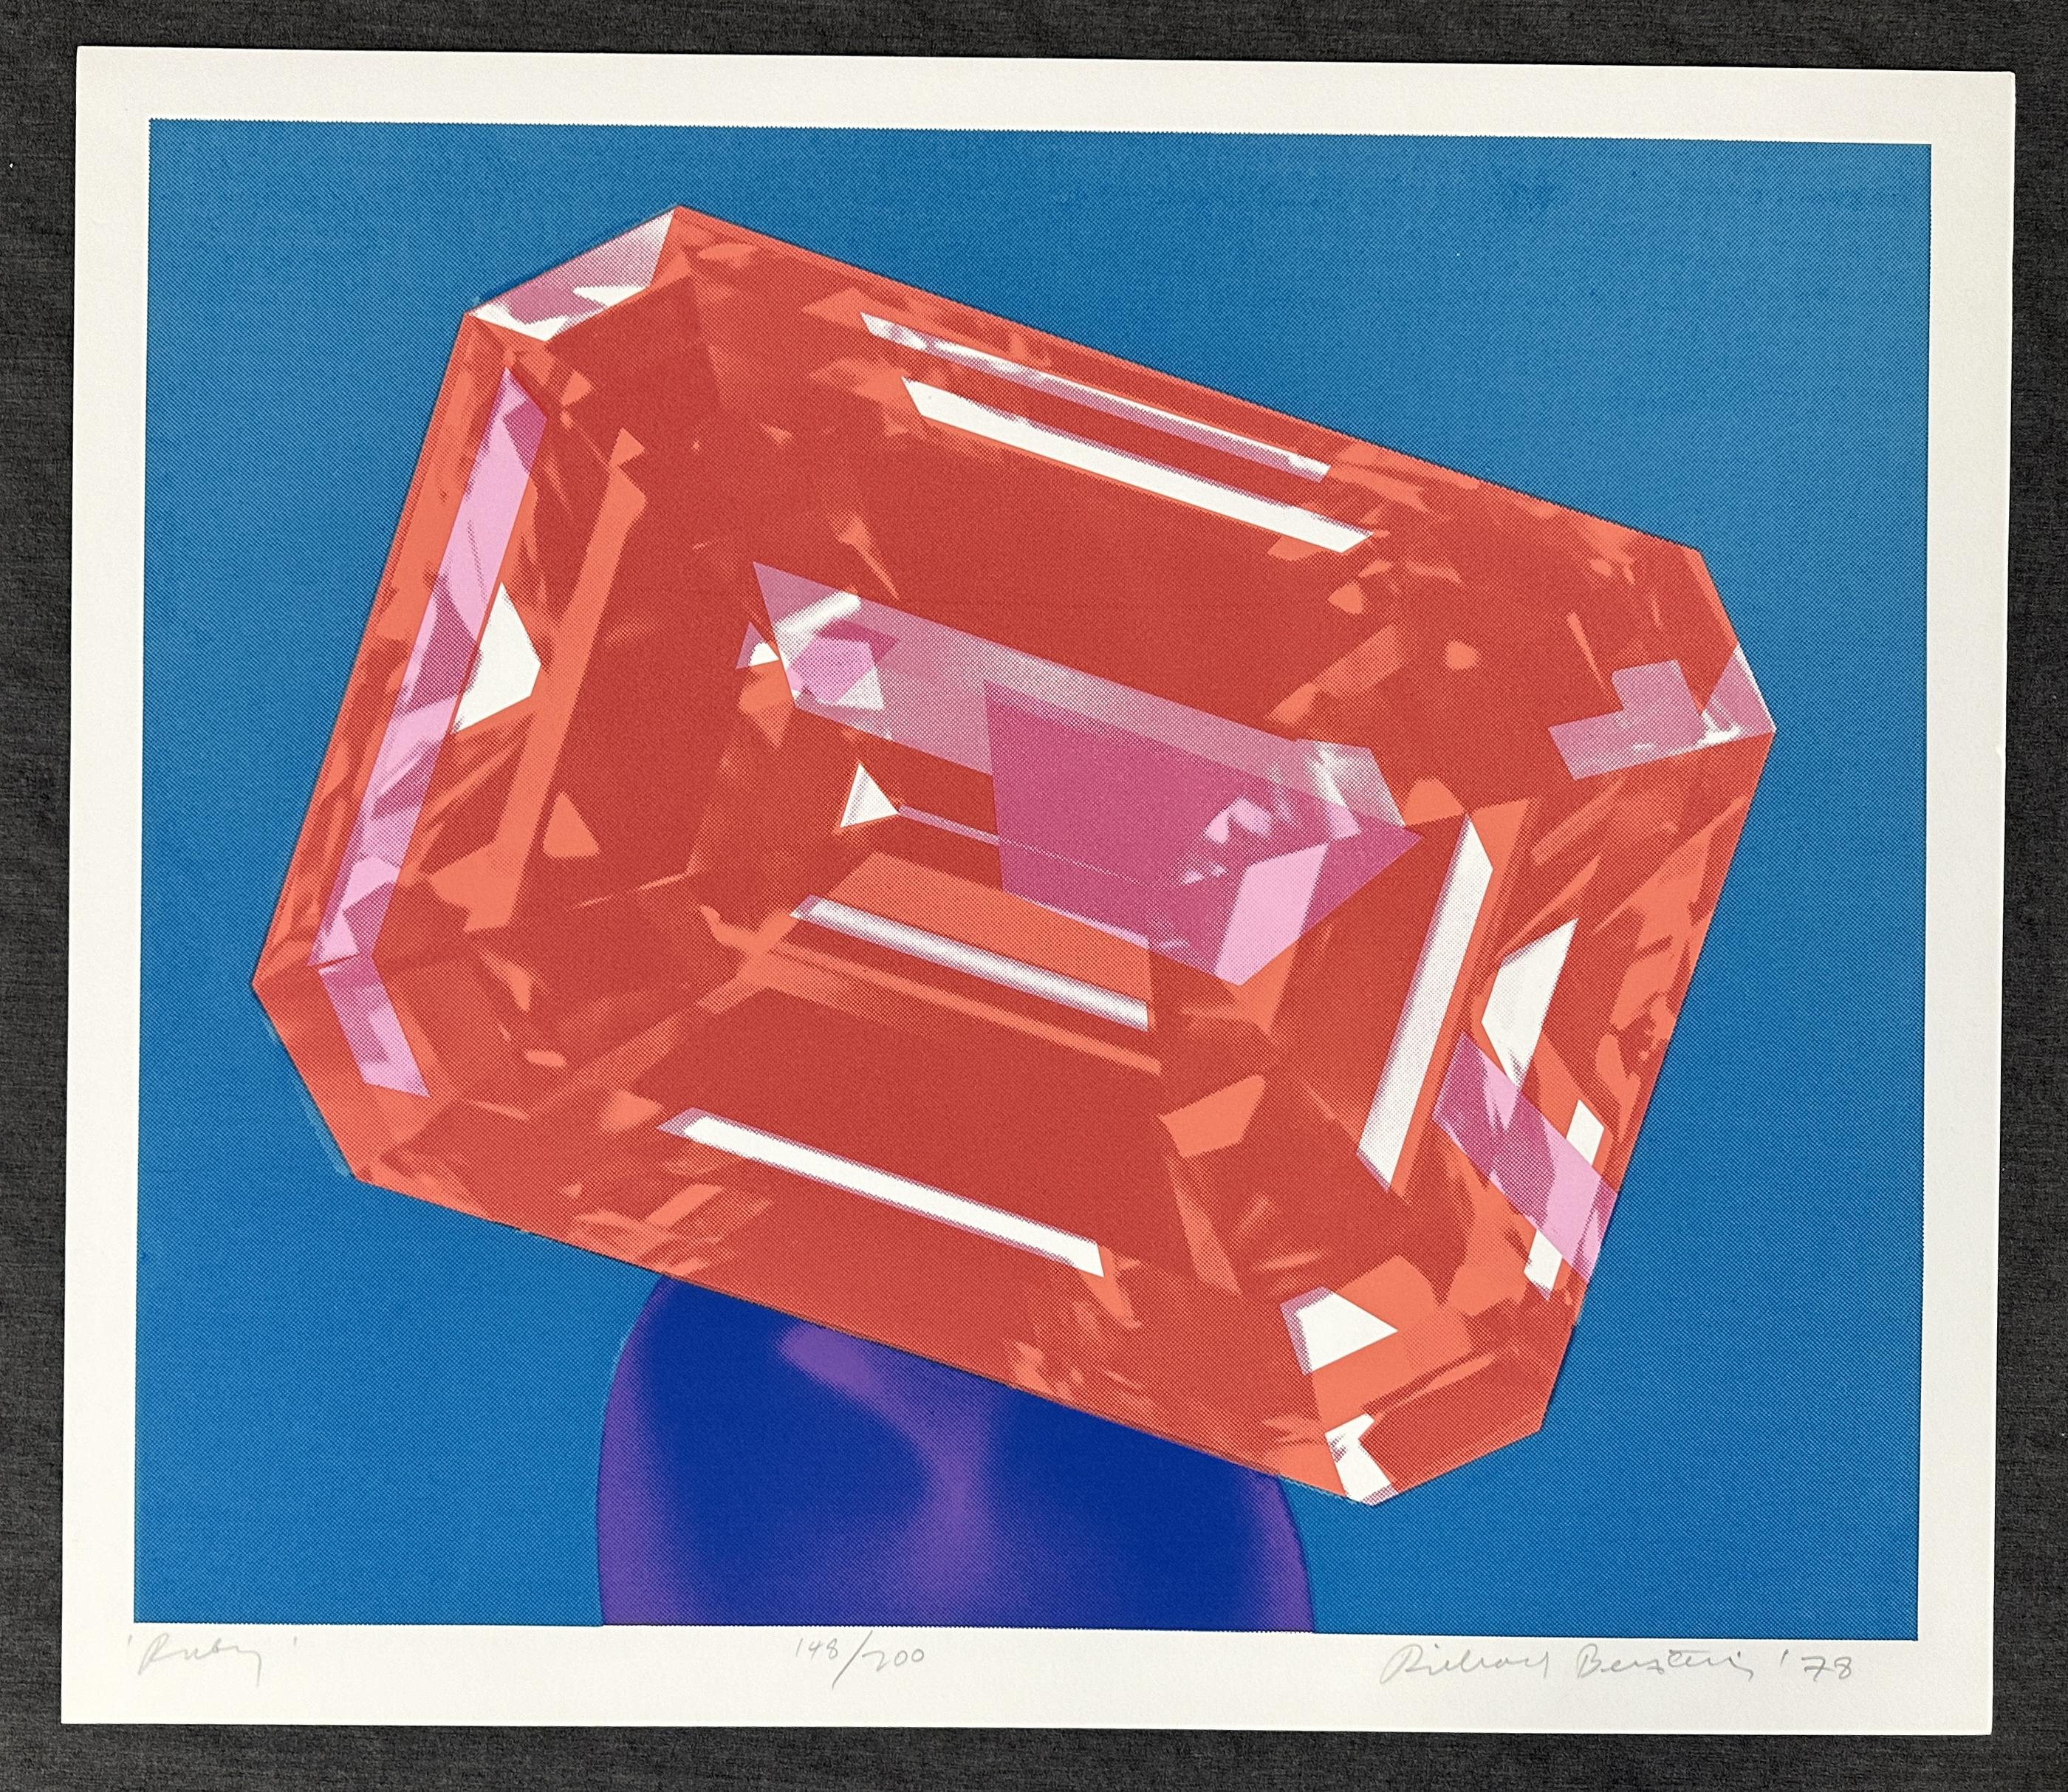 Richard Bernstein
Ruby - 1978
Print - Silkscreen on Heavy Paper
Paper : 30'' x 26'' inches
image size : 28